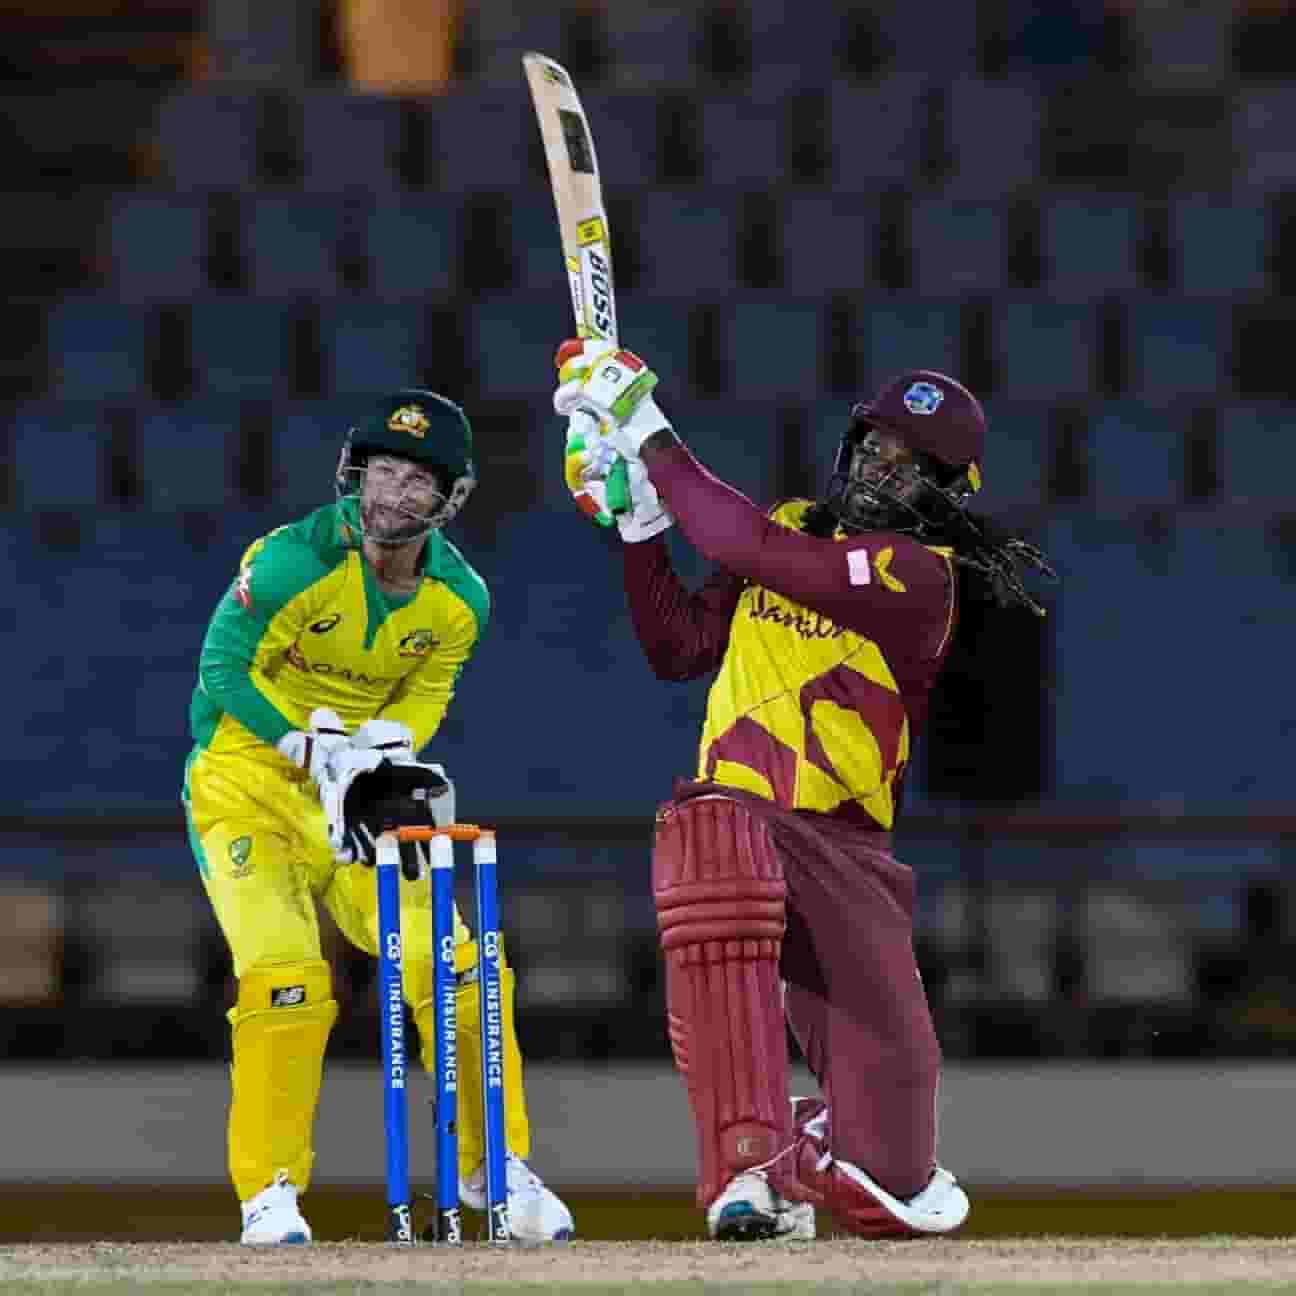 Chris Gayle Pulls A Stunning Win In The Australia Versus West Indies T20 Match